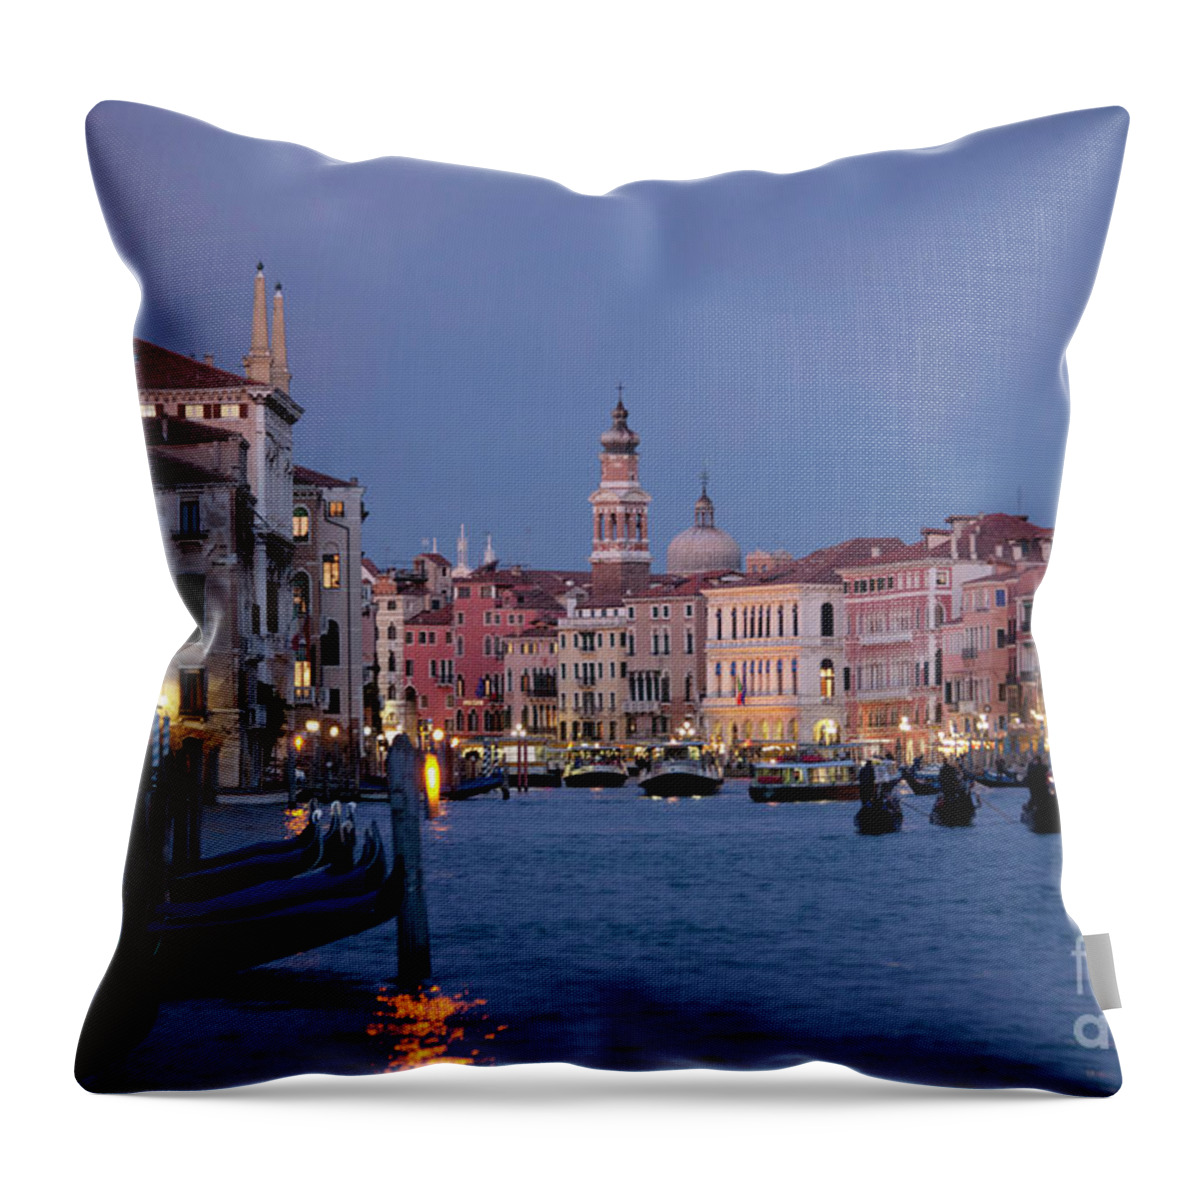 Venice Throw Pillow featuring the photograph Venice Blue Hour 2 by Heiko Koehrer-Wagner